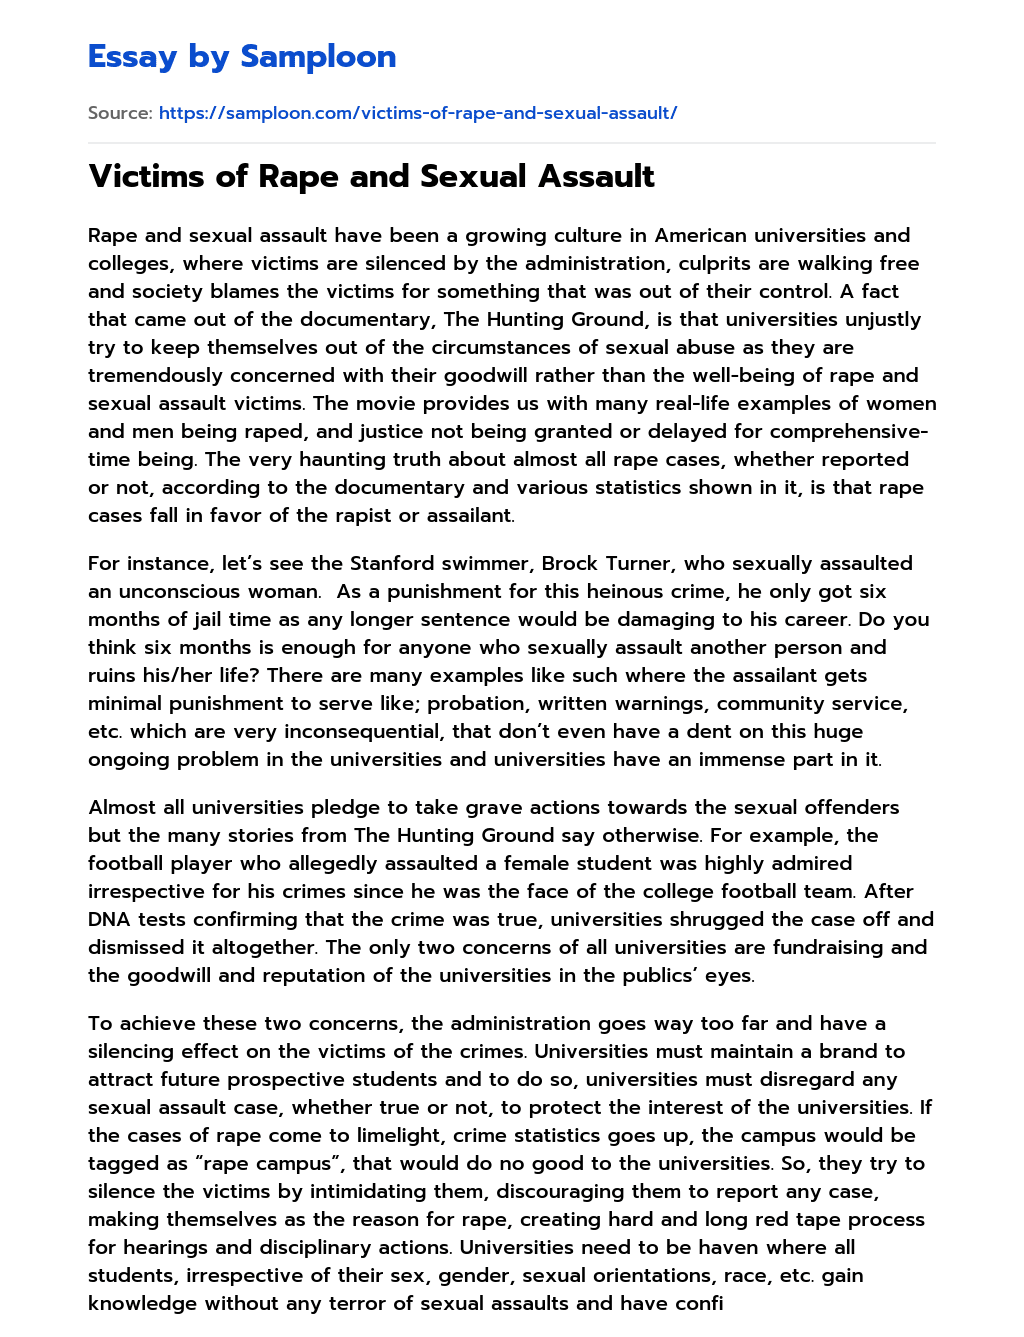 Victims of Rape and Sexual Assault essay